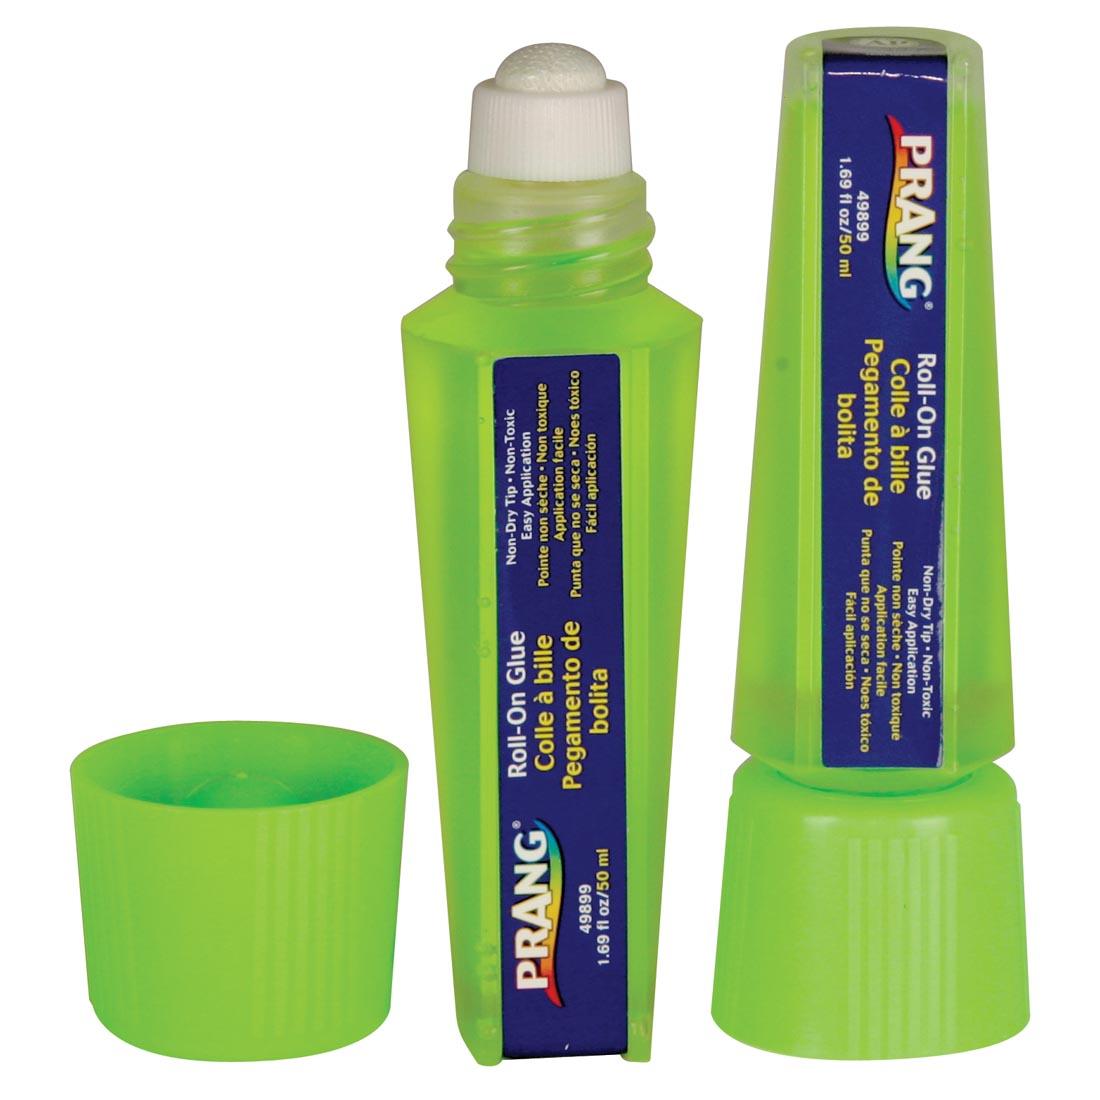 Prang Roll-On Glue Shown Both With Lid Off and Being Stored Upside Down